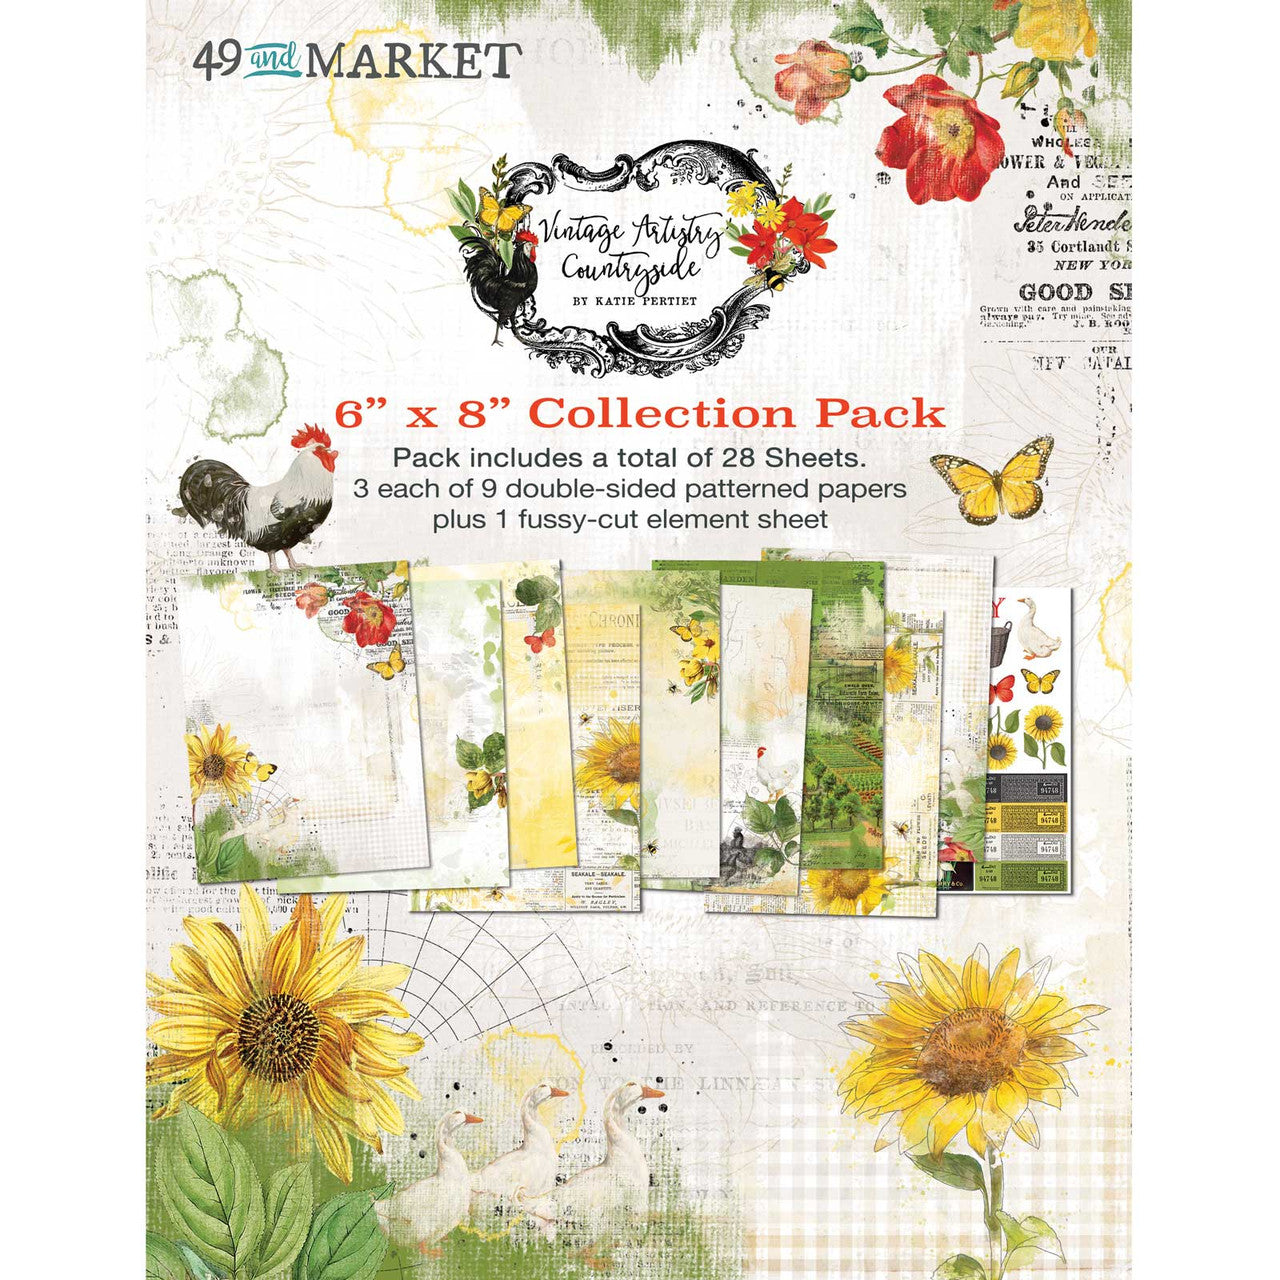 49 & Market Vintage Artistry Countryside 6 x 8 Collection Pack